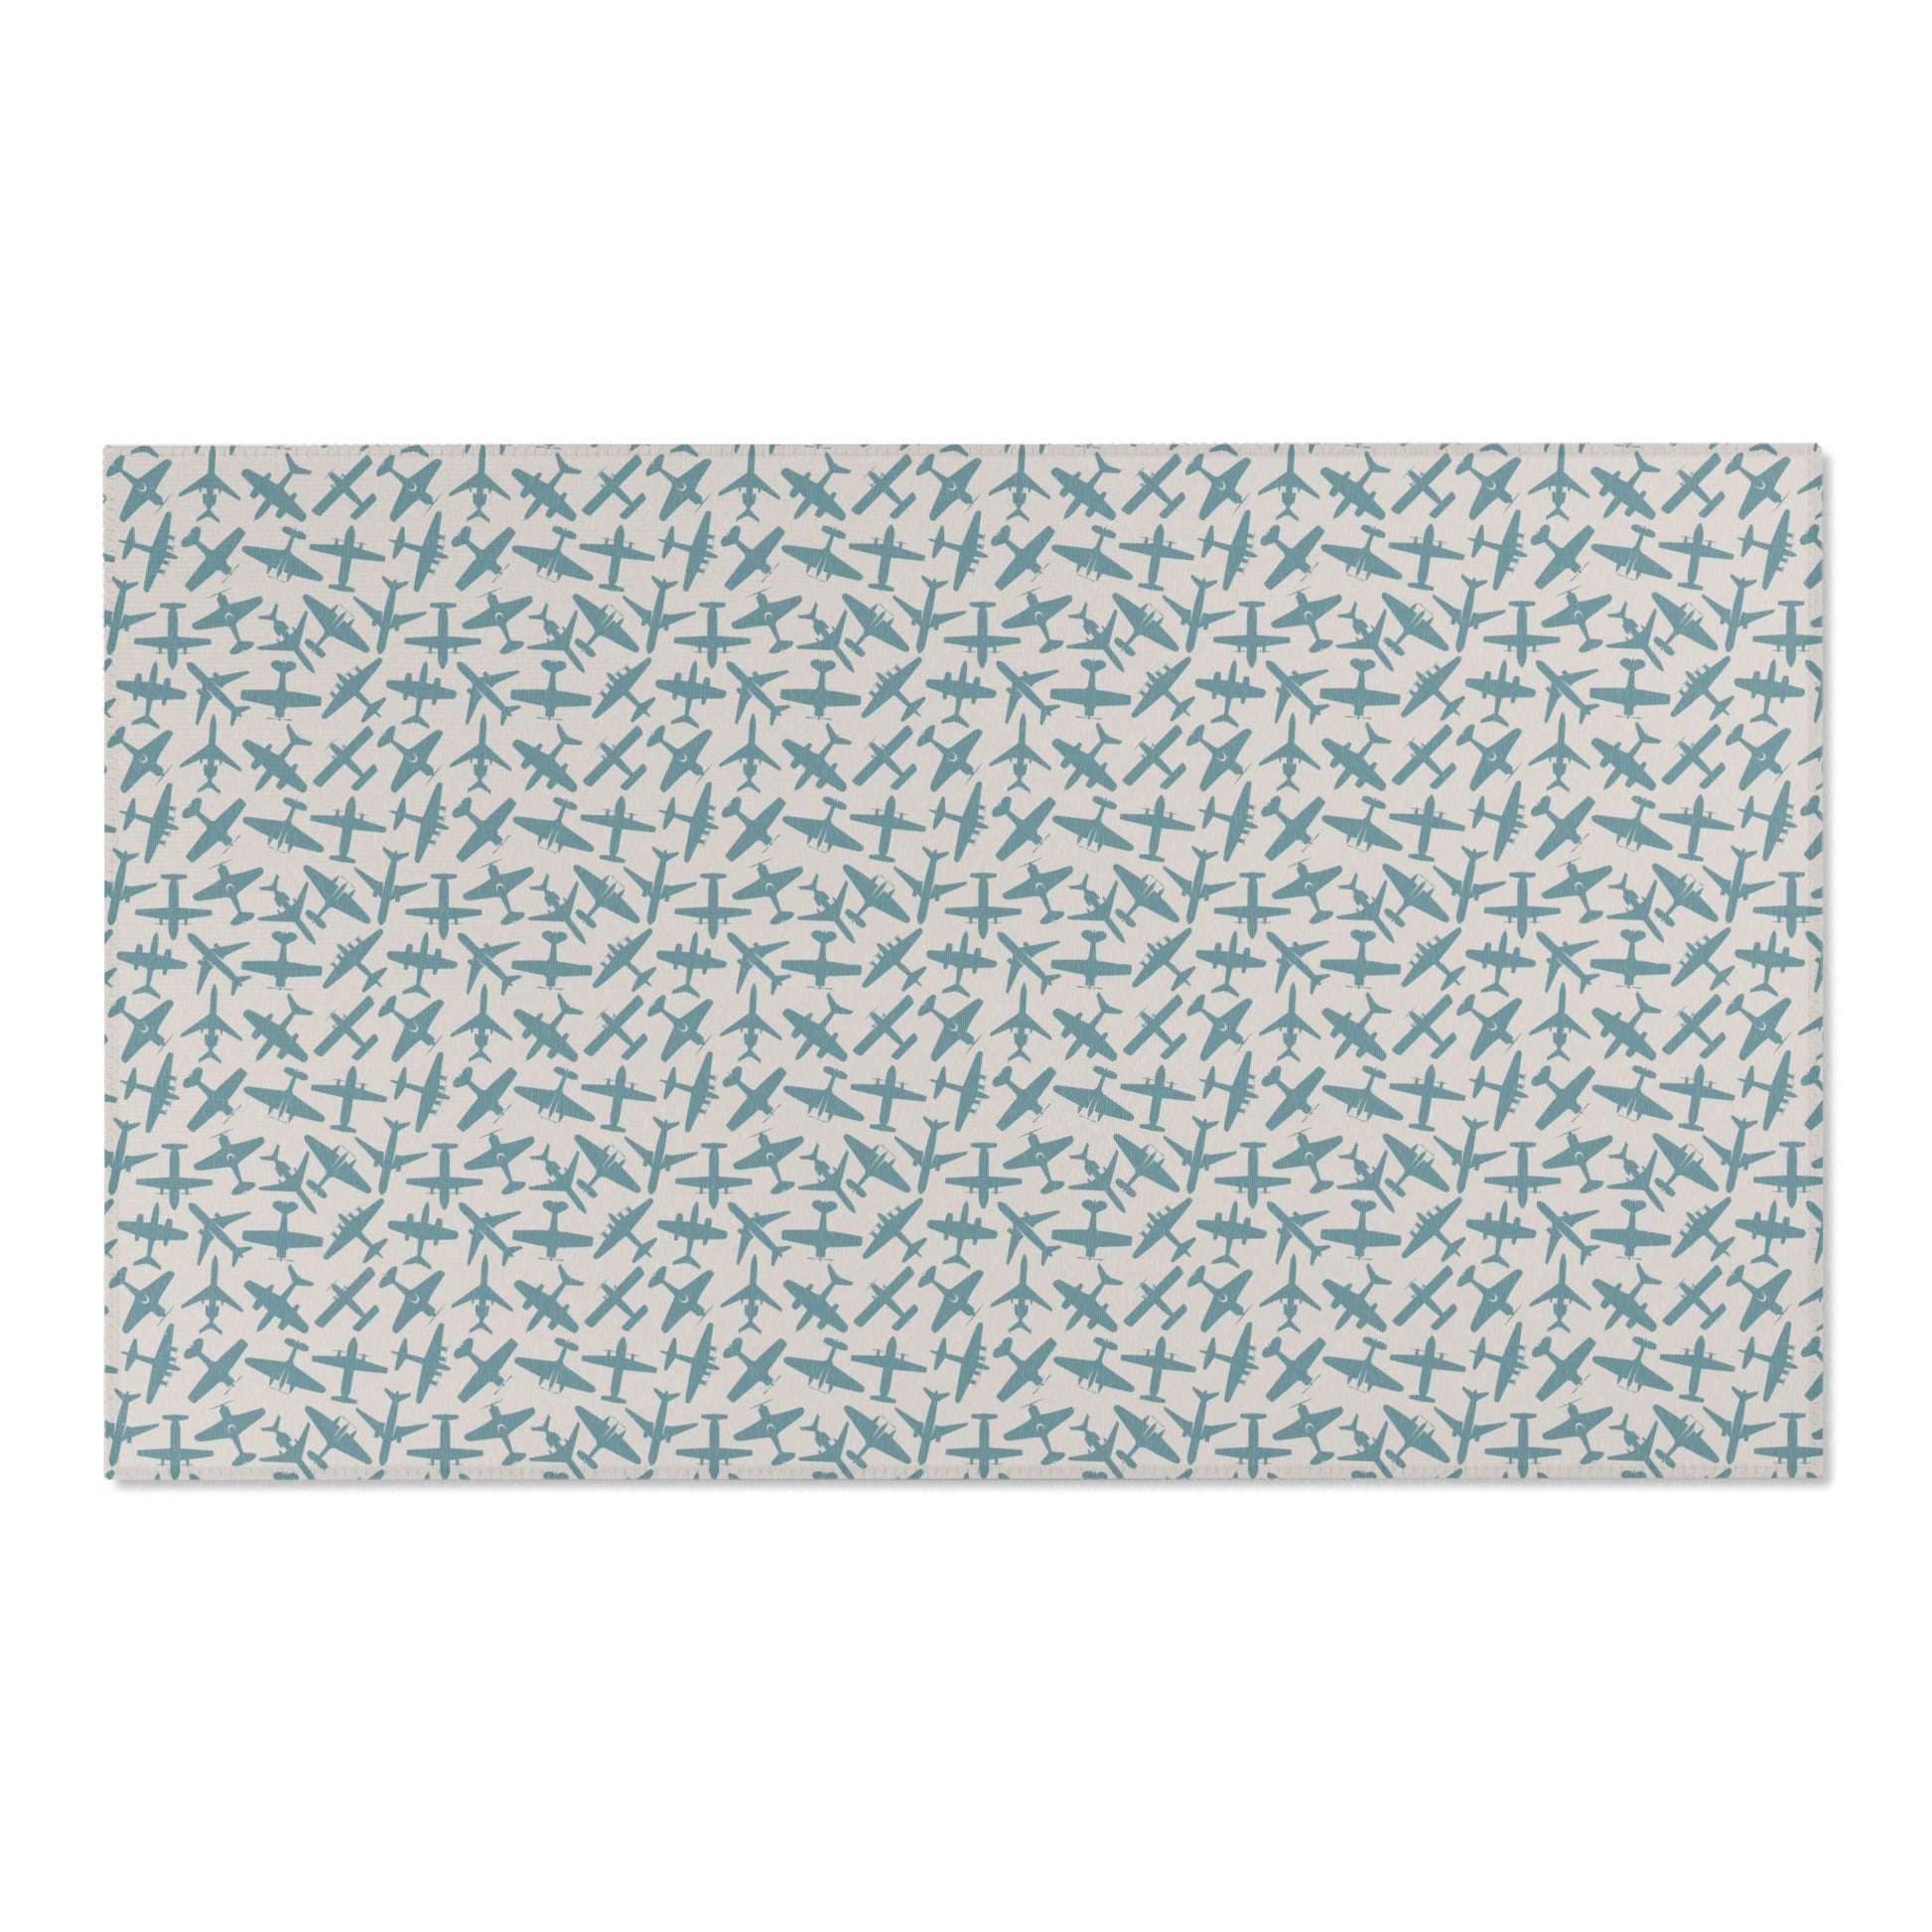 aviation merchandise, airplane patterned aviation area rug 4